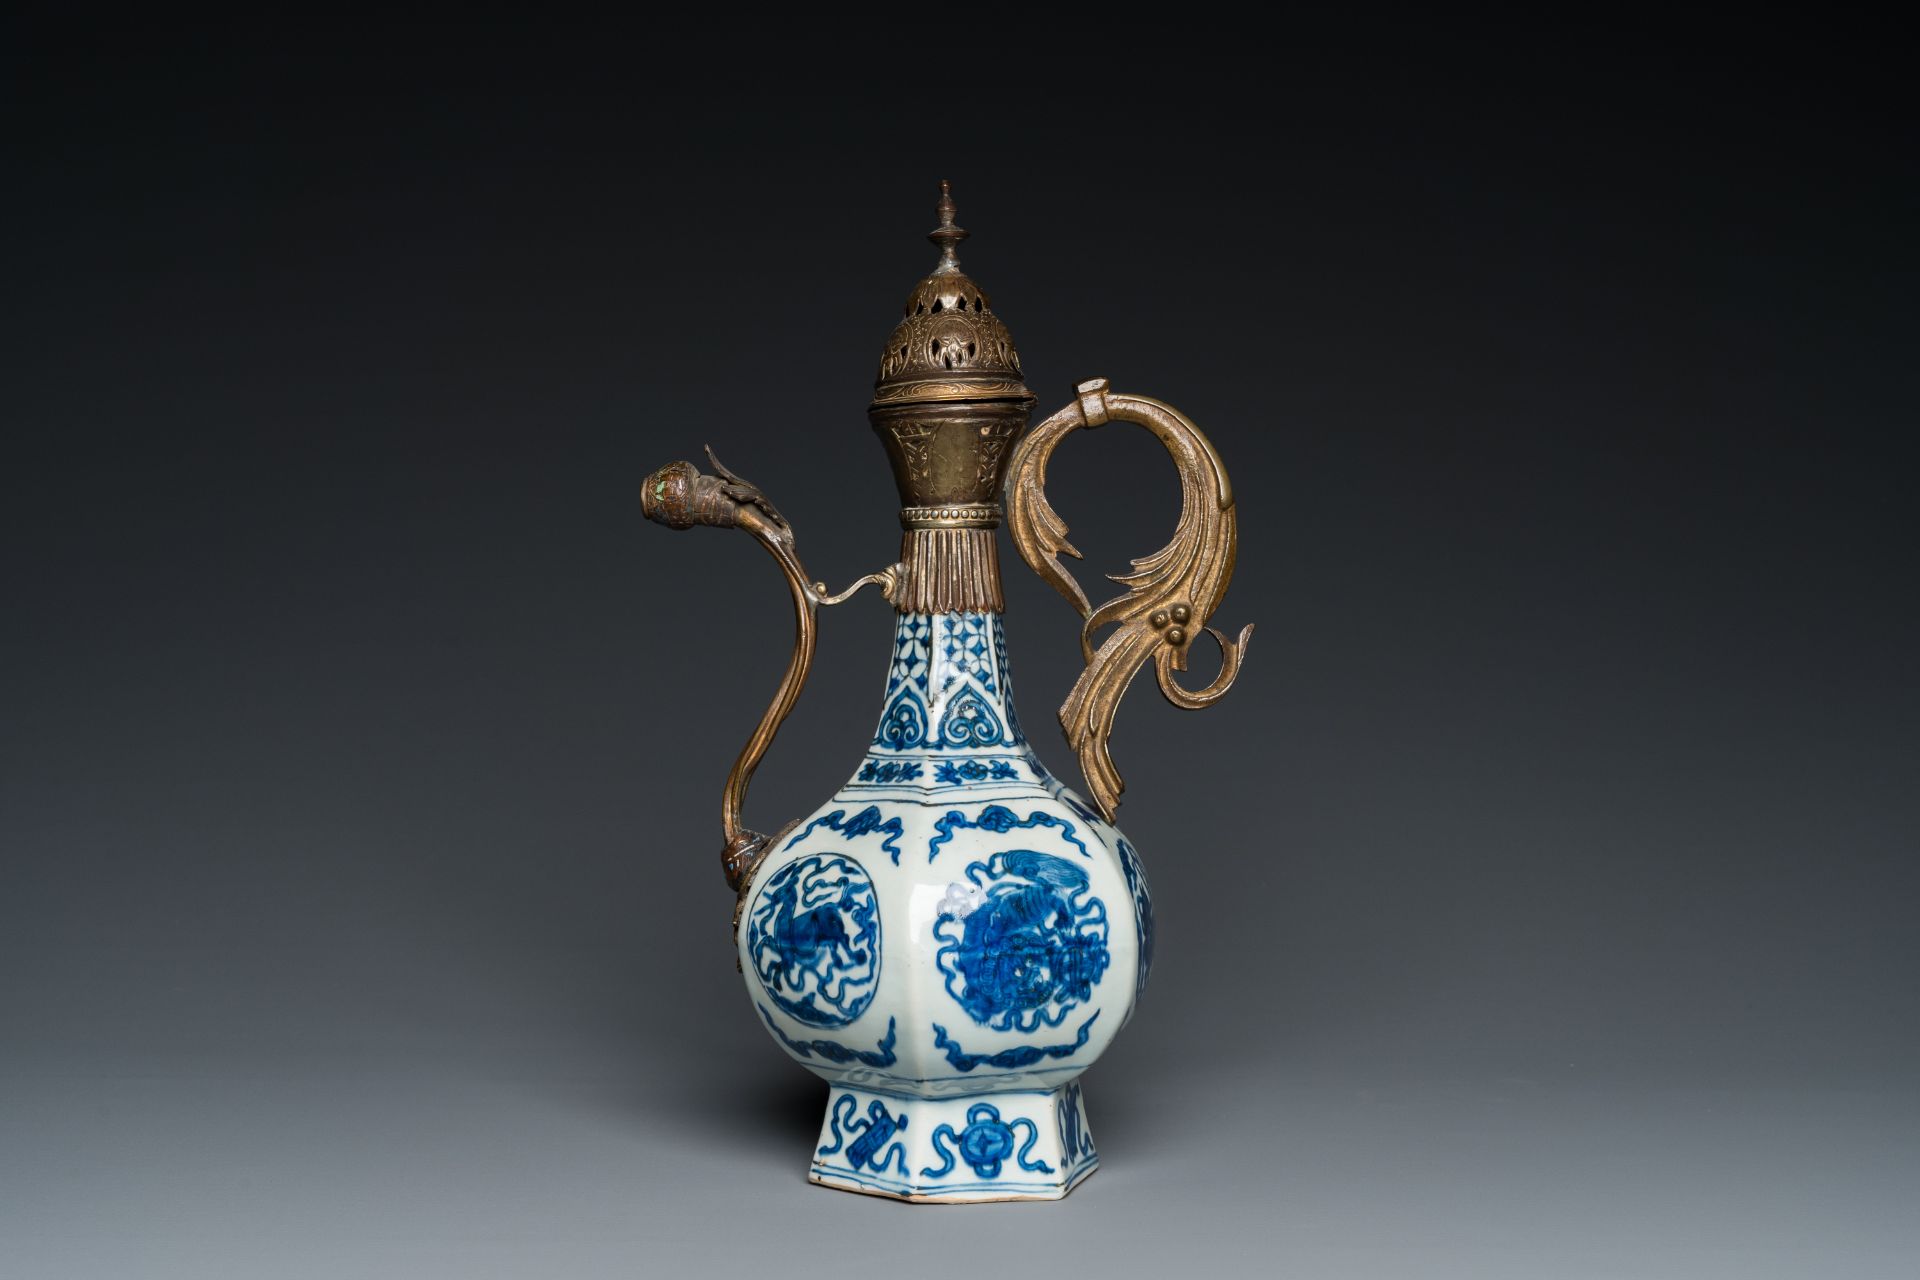 A Chinese blue and white gilt-bronze mounted vase transformed into a ewer for the Ottoman market, Ji